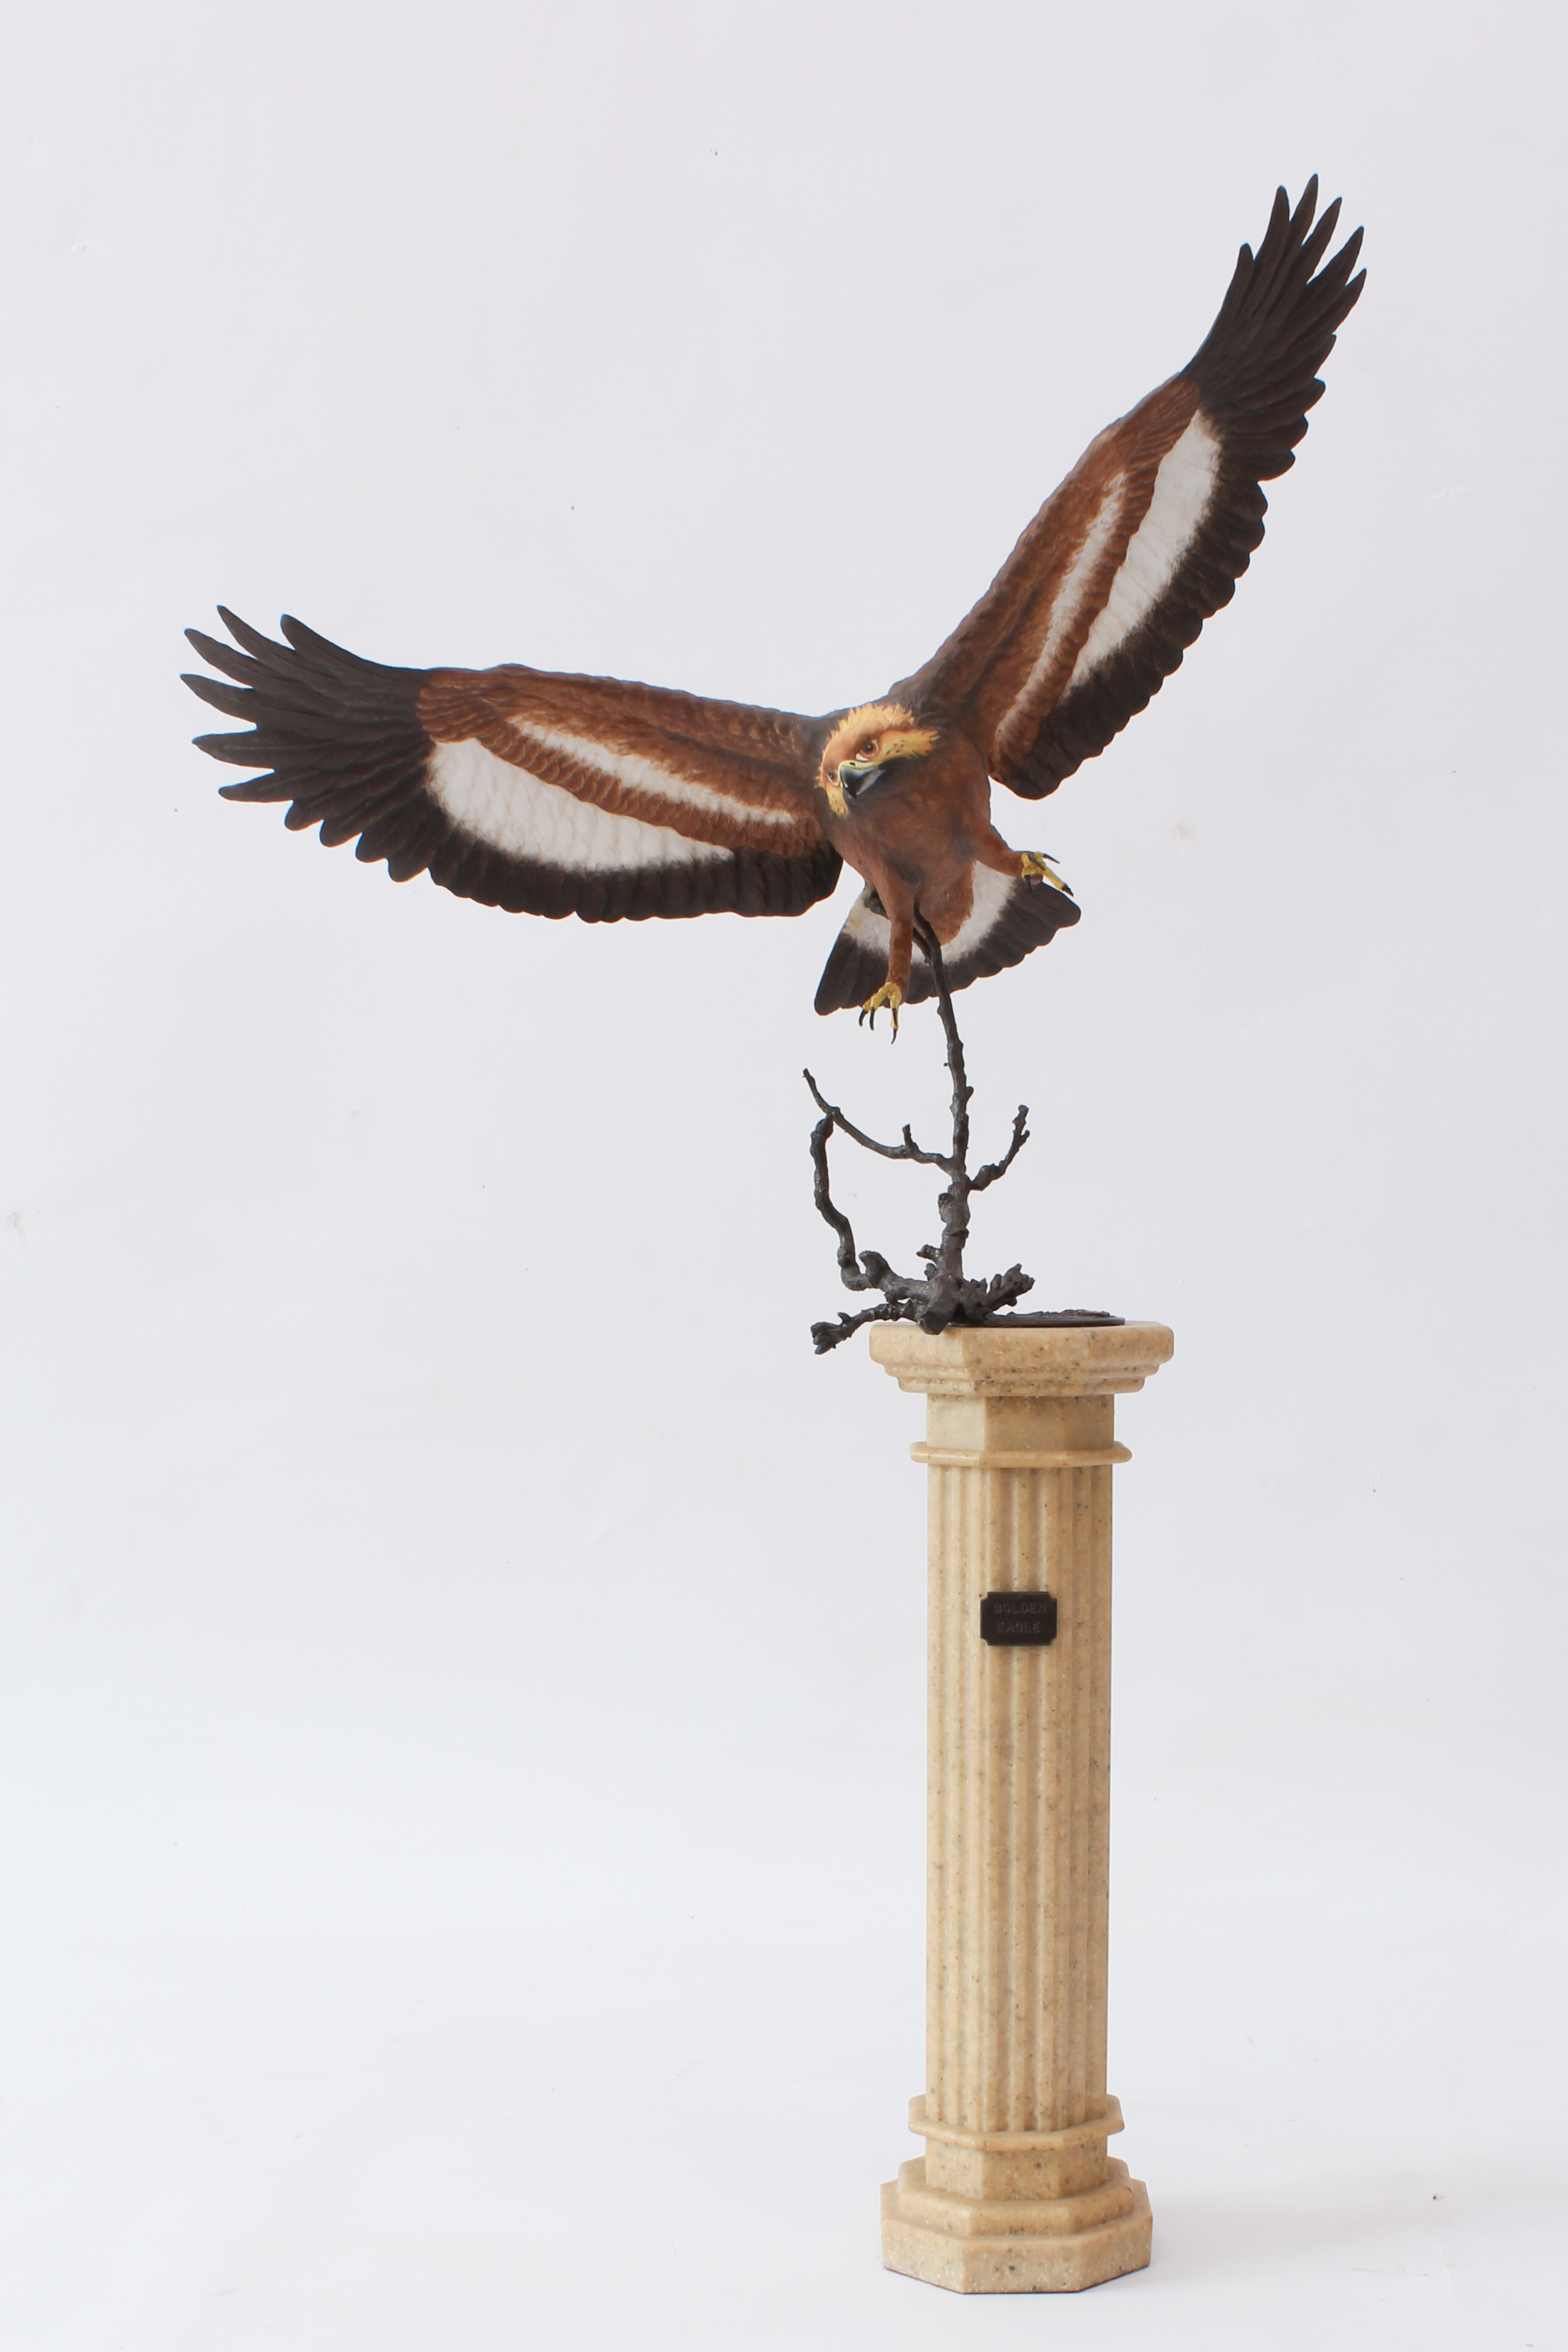 David Fryer Studios for Danbury Mint: a limited edition bronze, porcelain and resin model of a